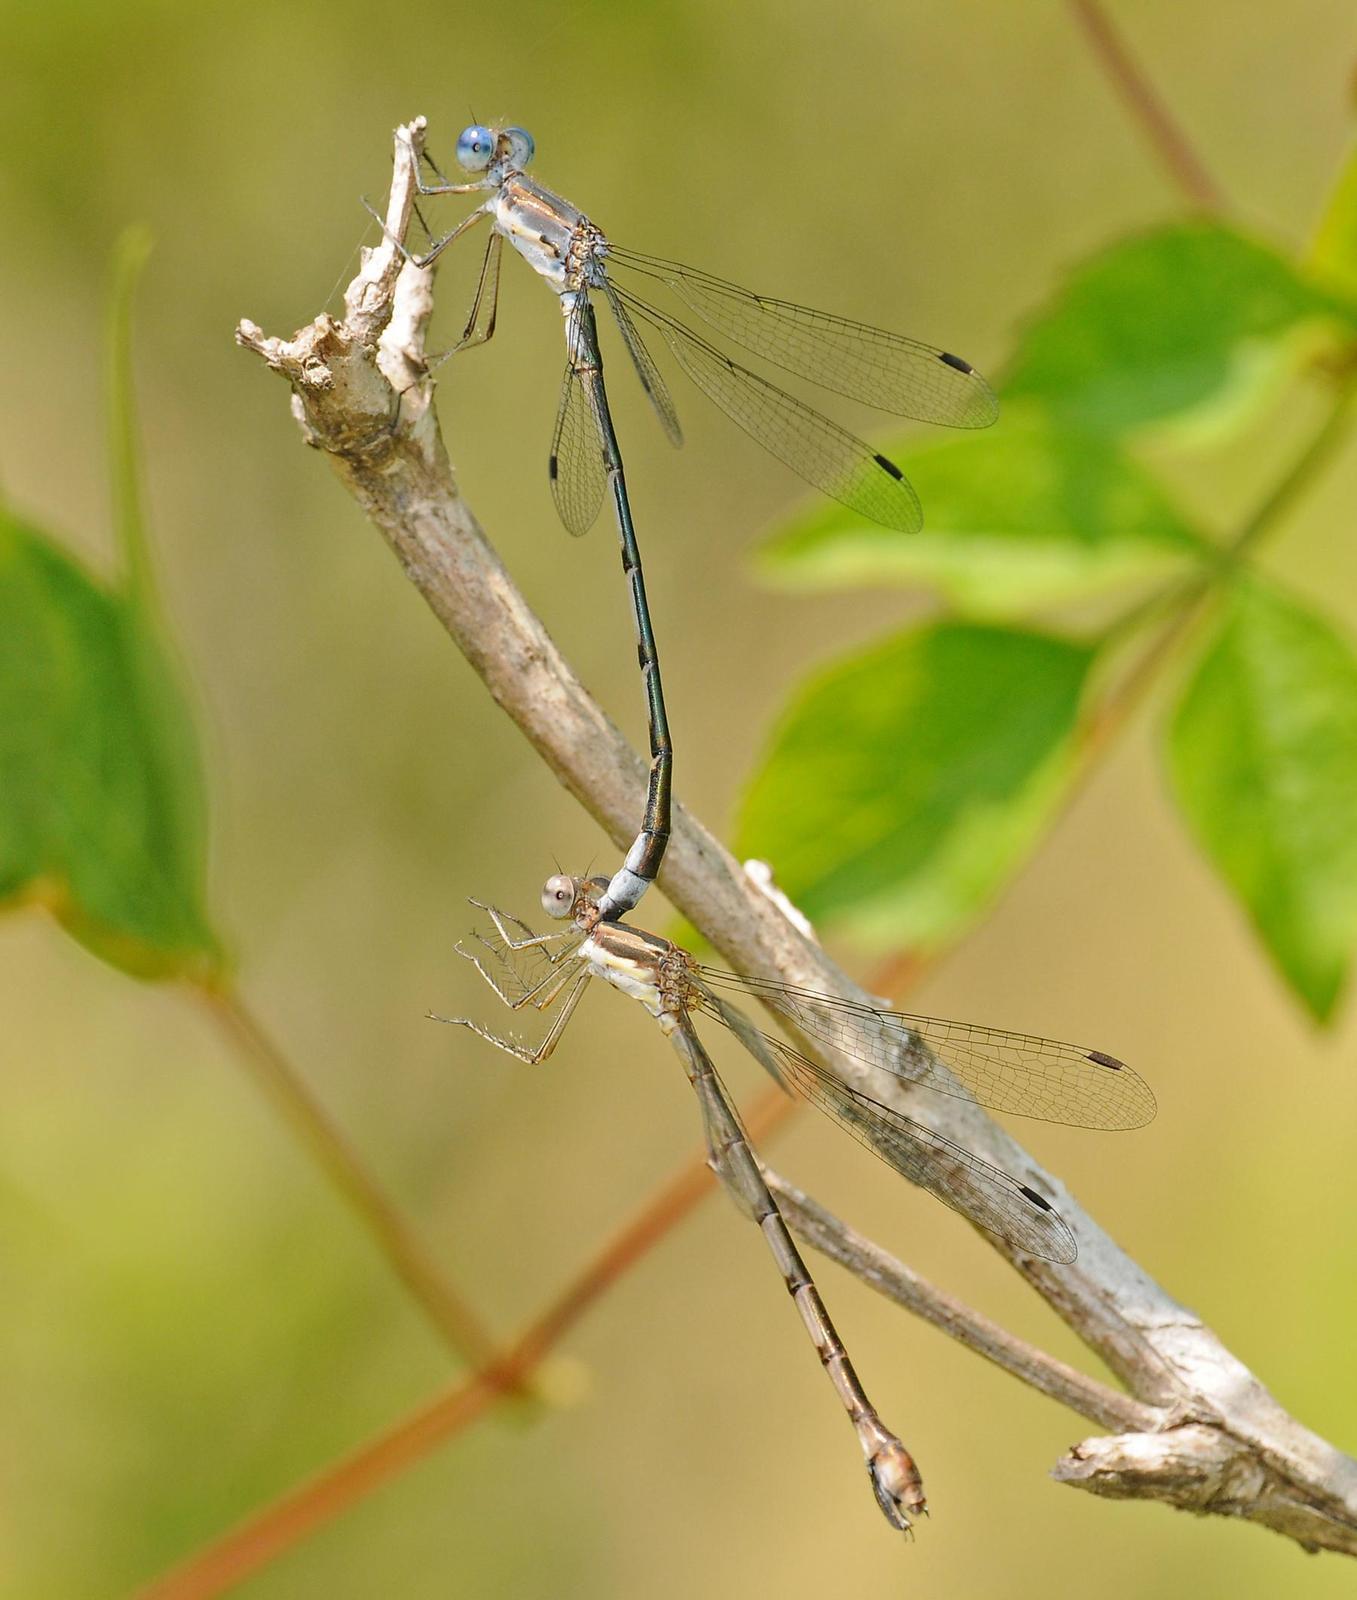 Sweetflag Spreadwing Photo by marion dobbs